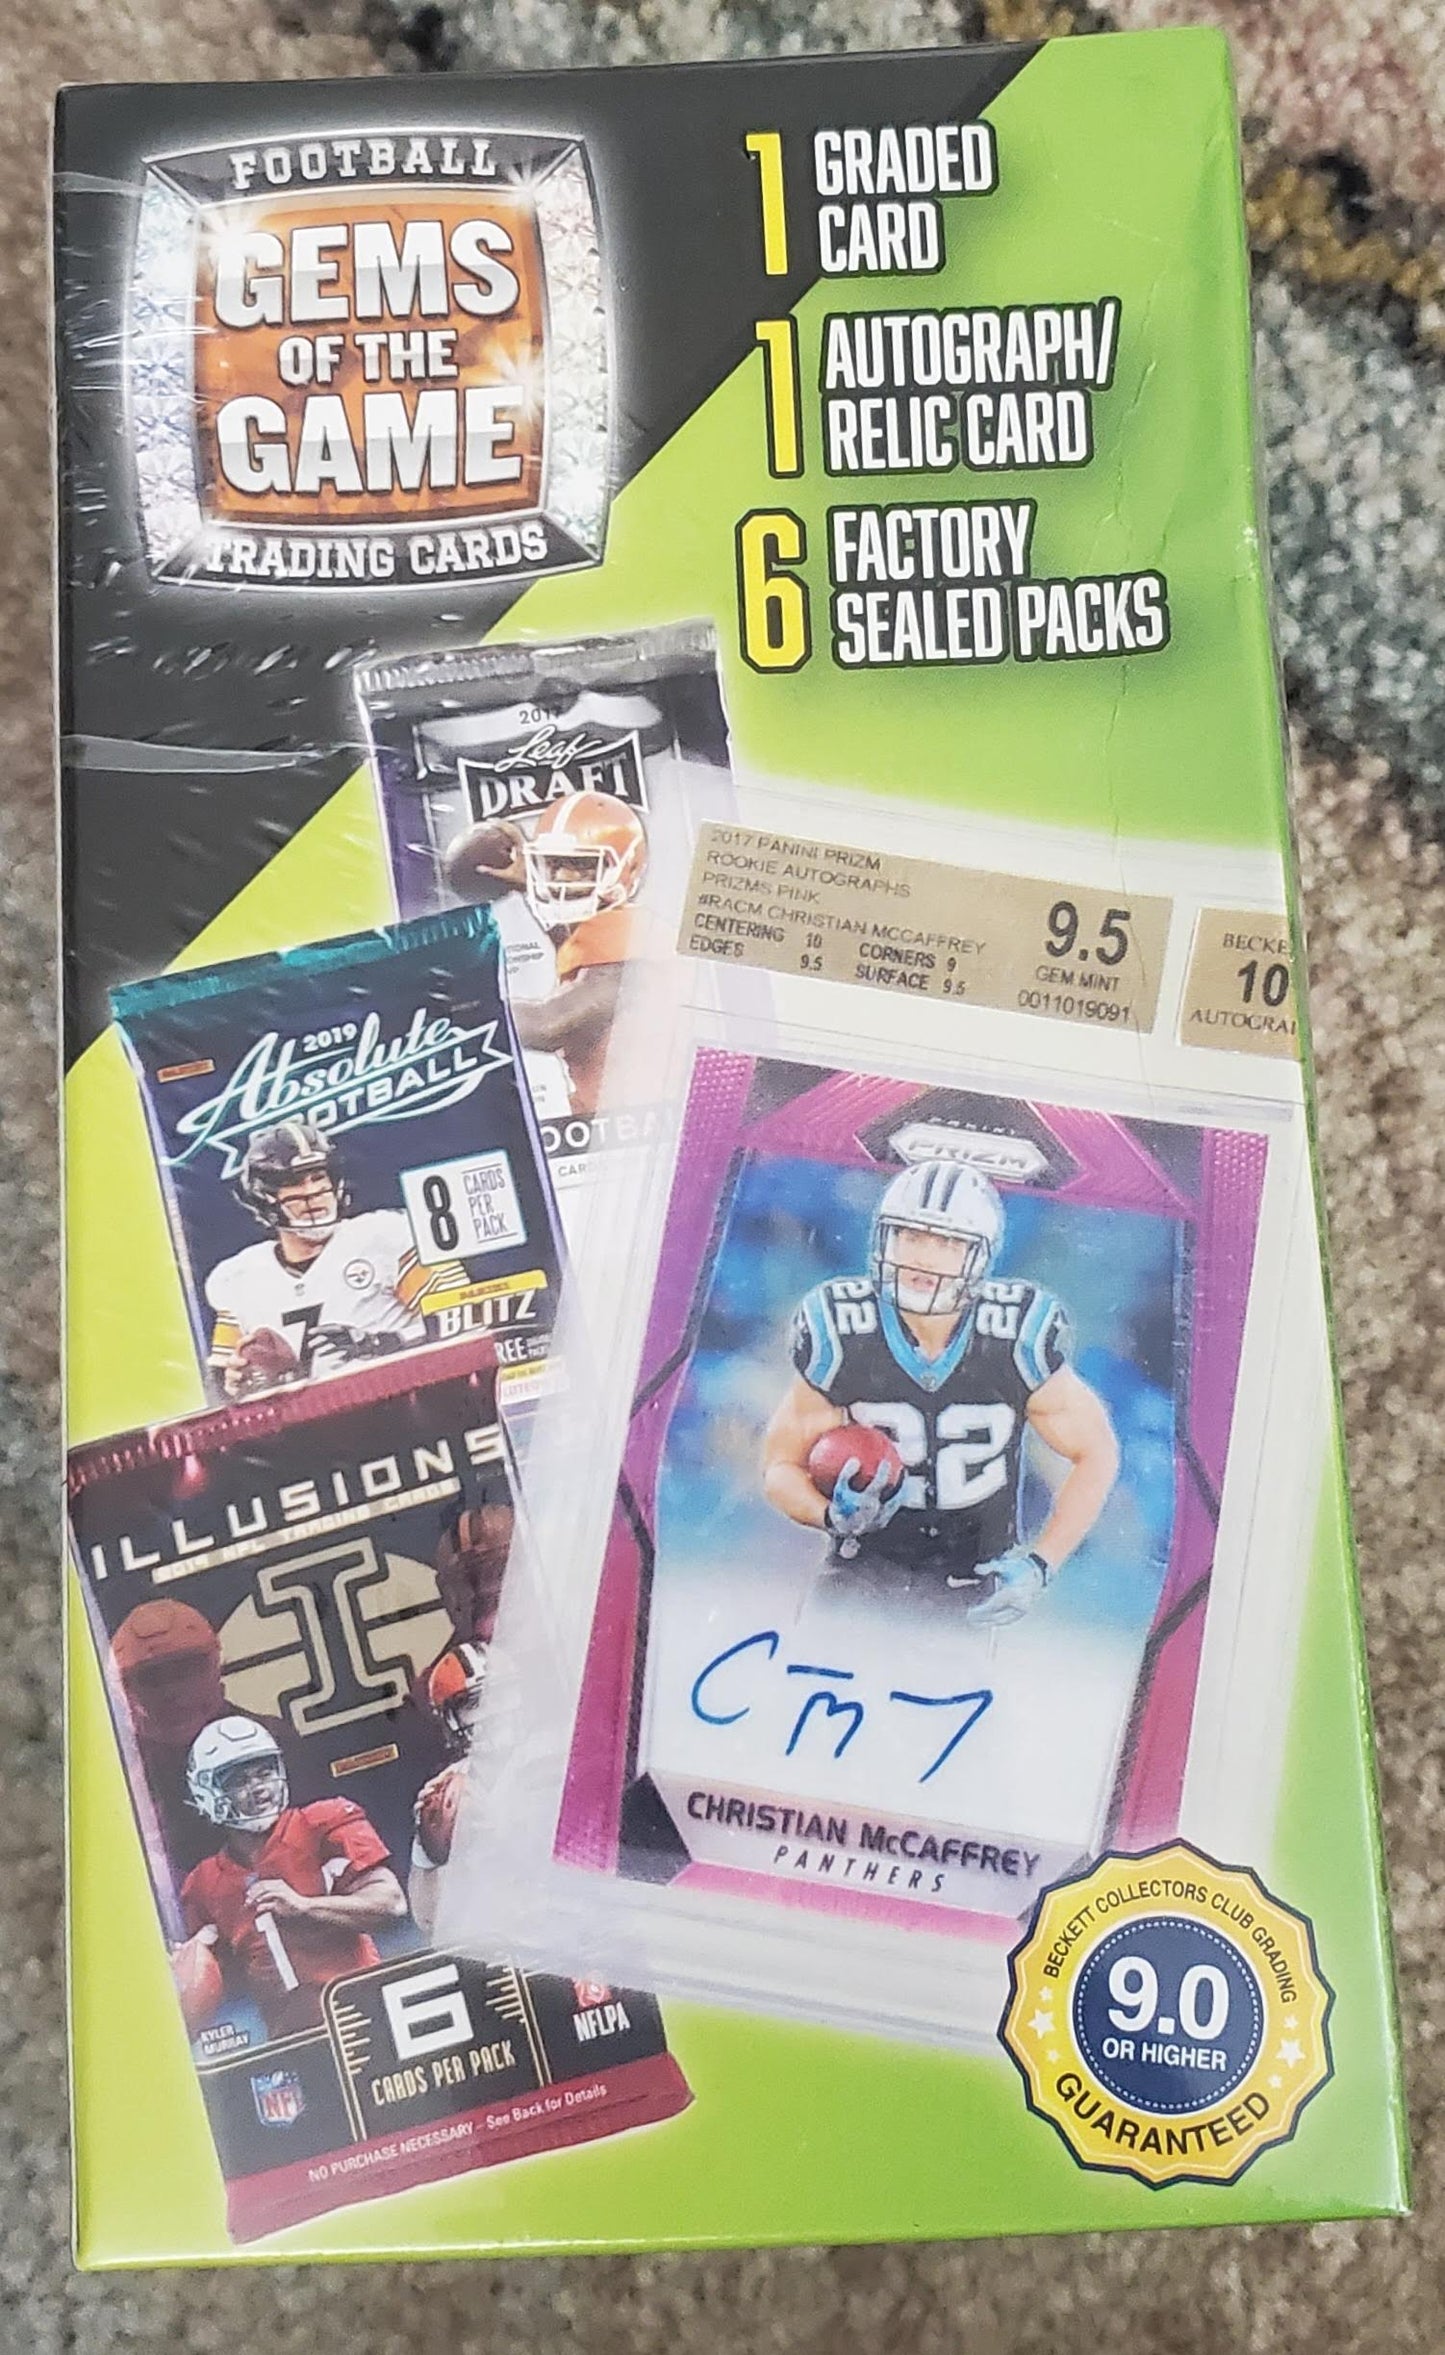 2020 Gems Of The Game Football Trading Cards - Sealed